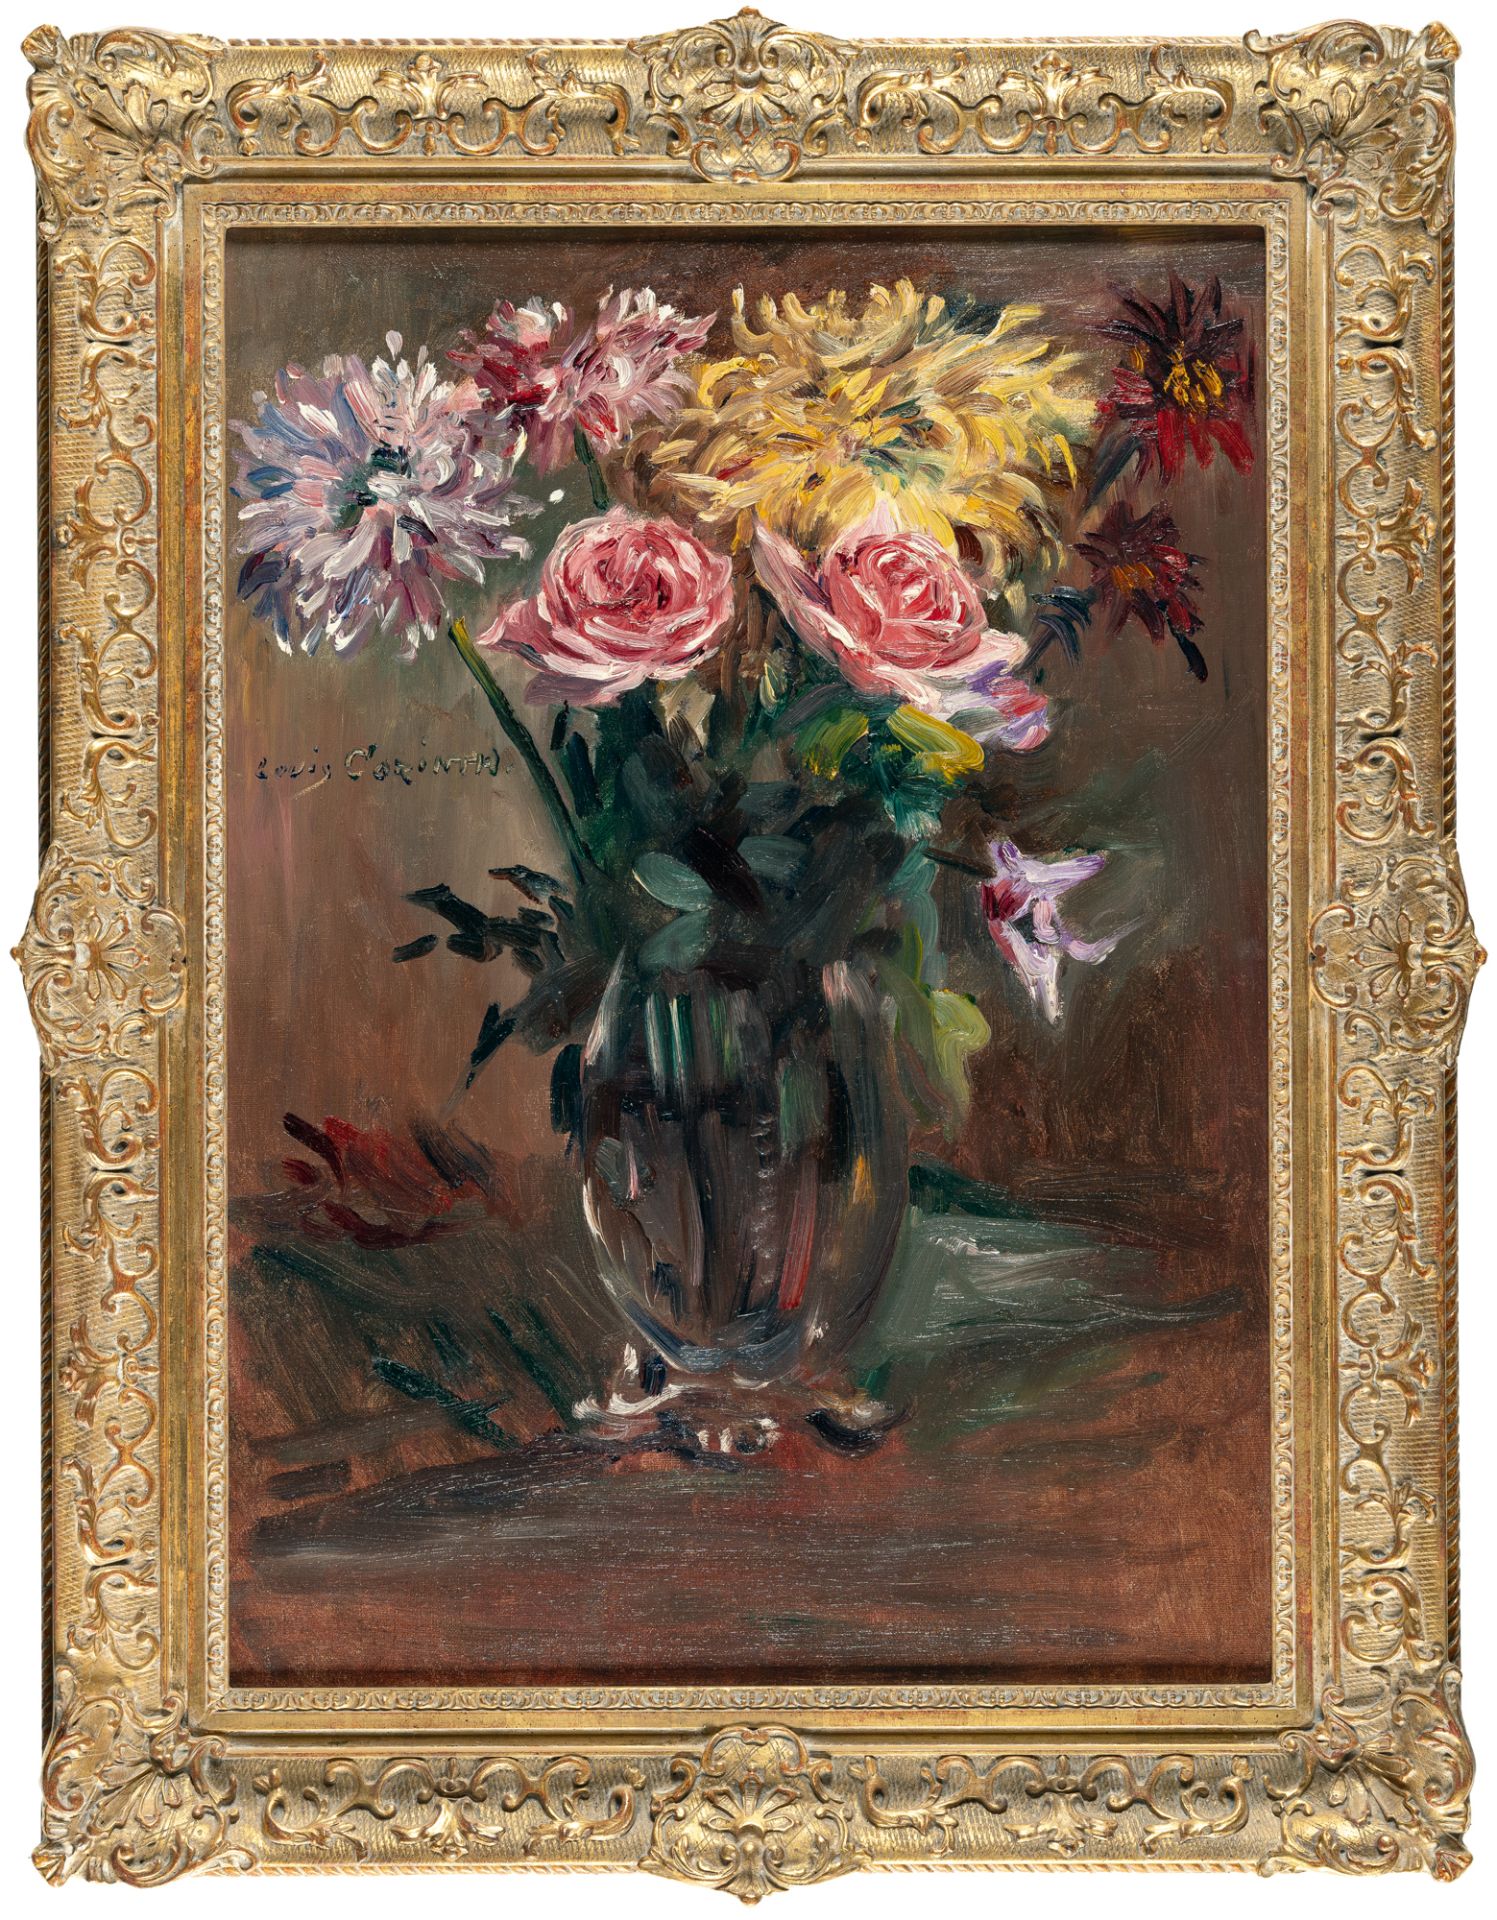 Lovis Corinth, Flowers in a vase.Oil on canvas. (1910). Ca. 70 x 50.5 cm. Signed centre left. - Image 2 of 4